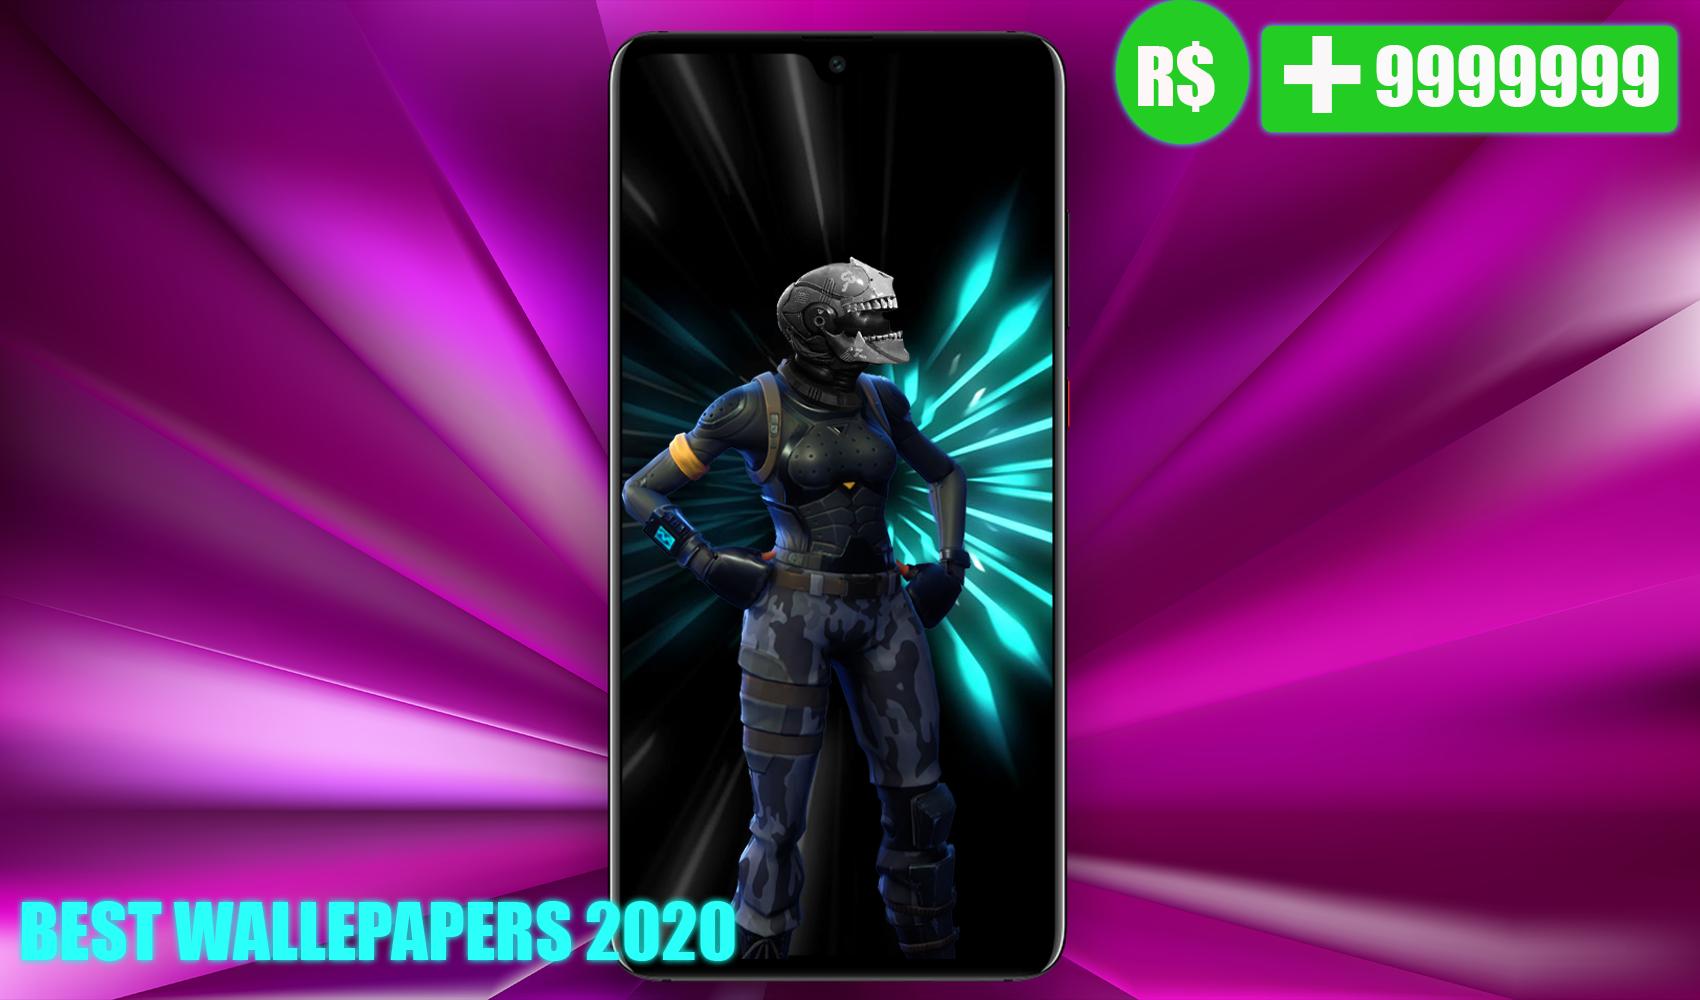 Fort Wallpapers Free Robux And Rbx Calculator For Android Apk Download - free robux for roblox calculator для андроид скачать apk